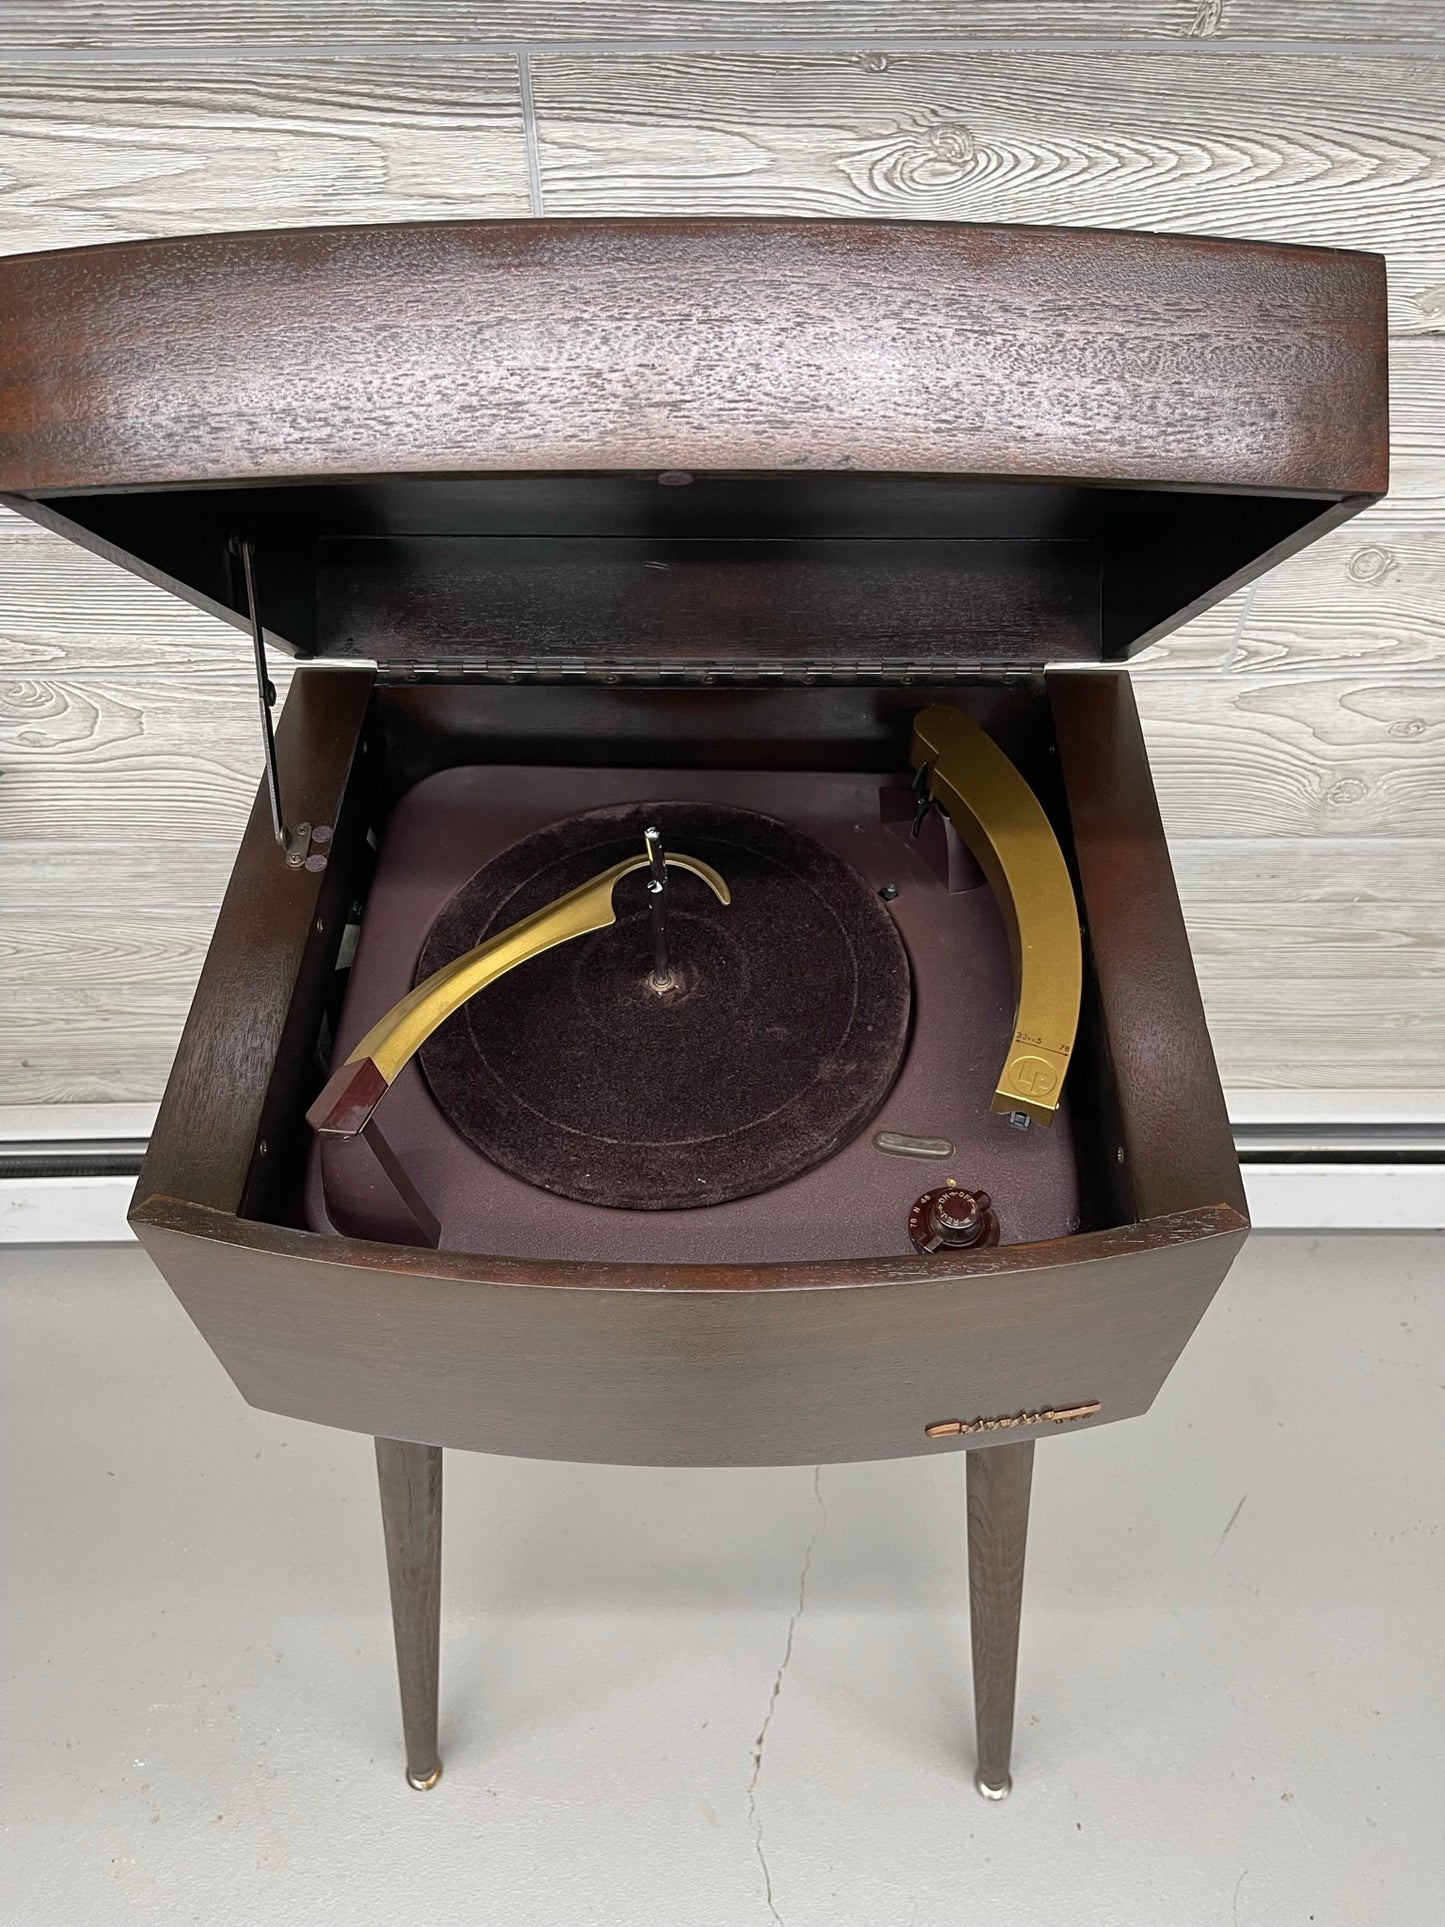 COLUMBIA 360 Mid Century Vintage Record Player Changer The Vintedge Co.